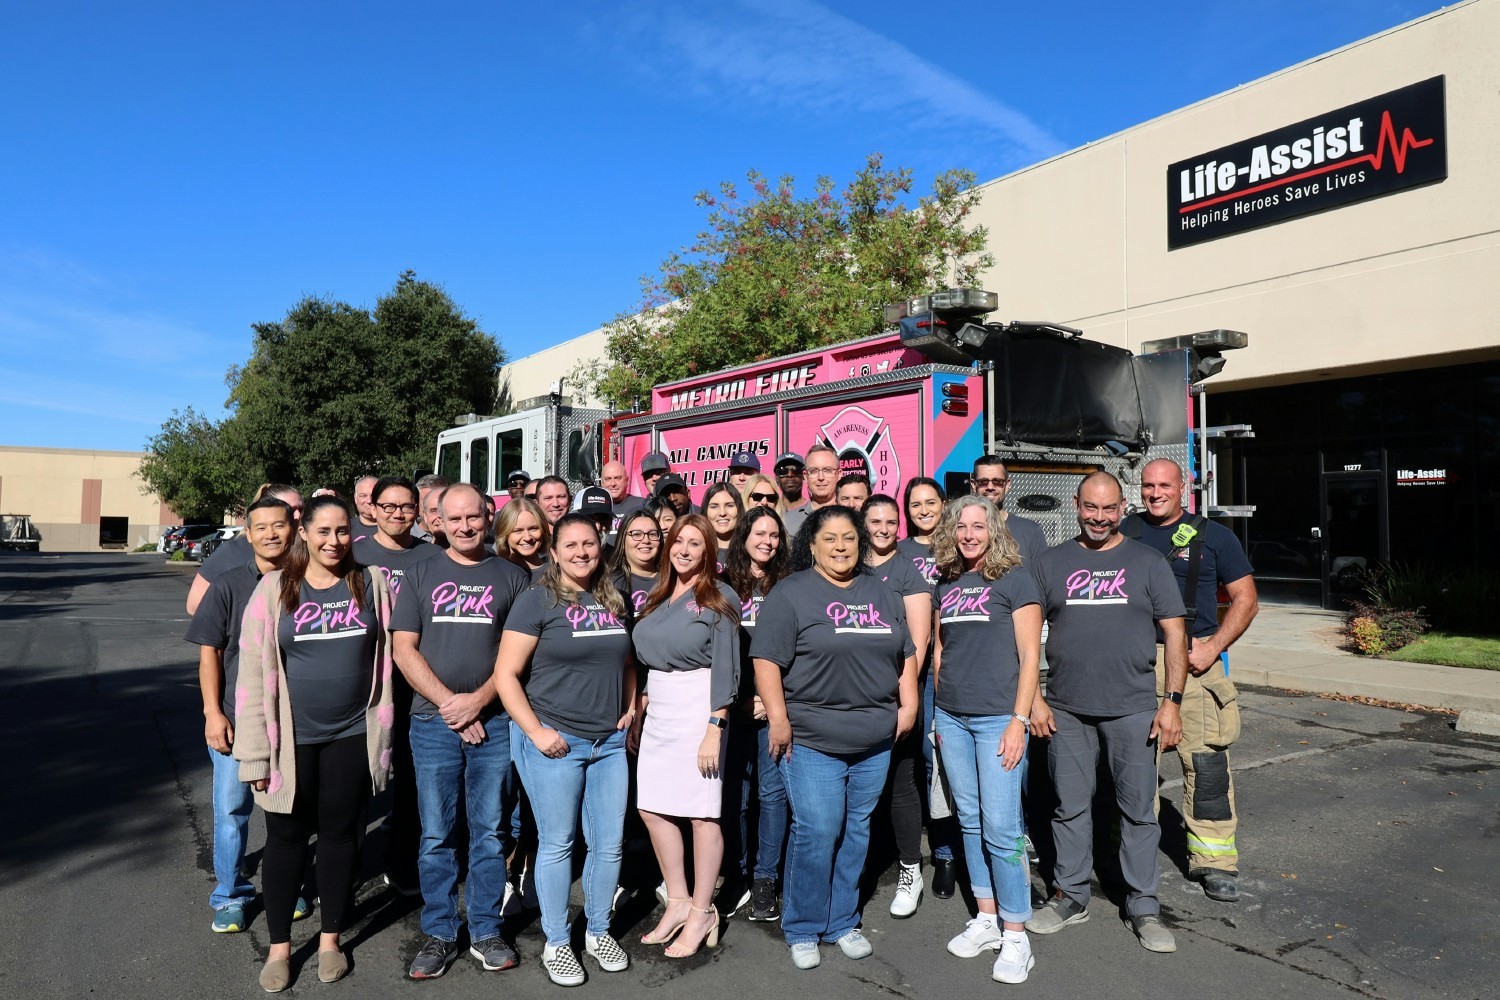 SacMetro Fire District visiting Life-Assist in their pink fire truck, in support of Breast Cancer Awareness Month